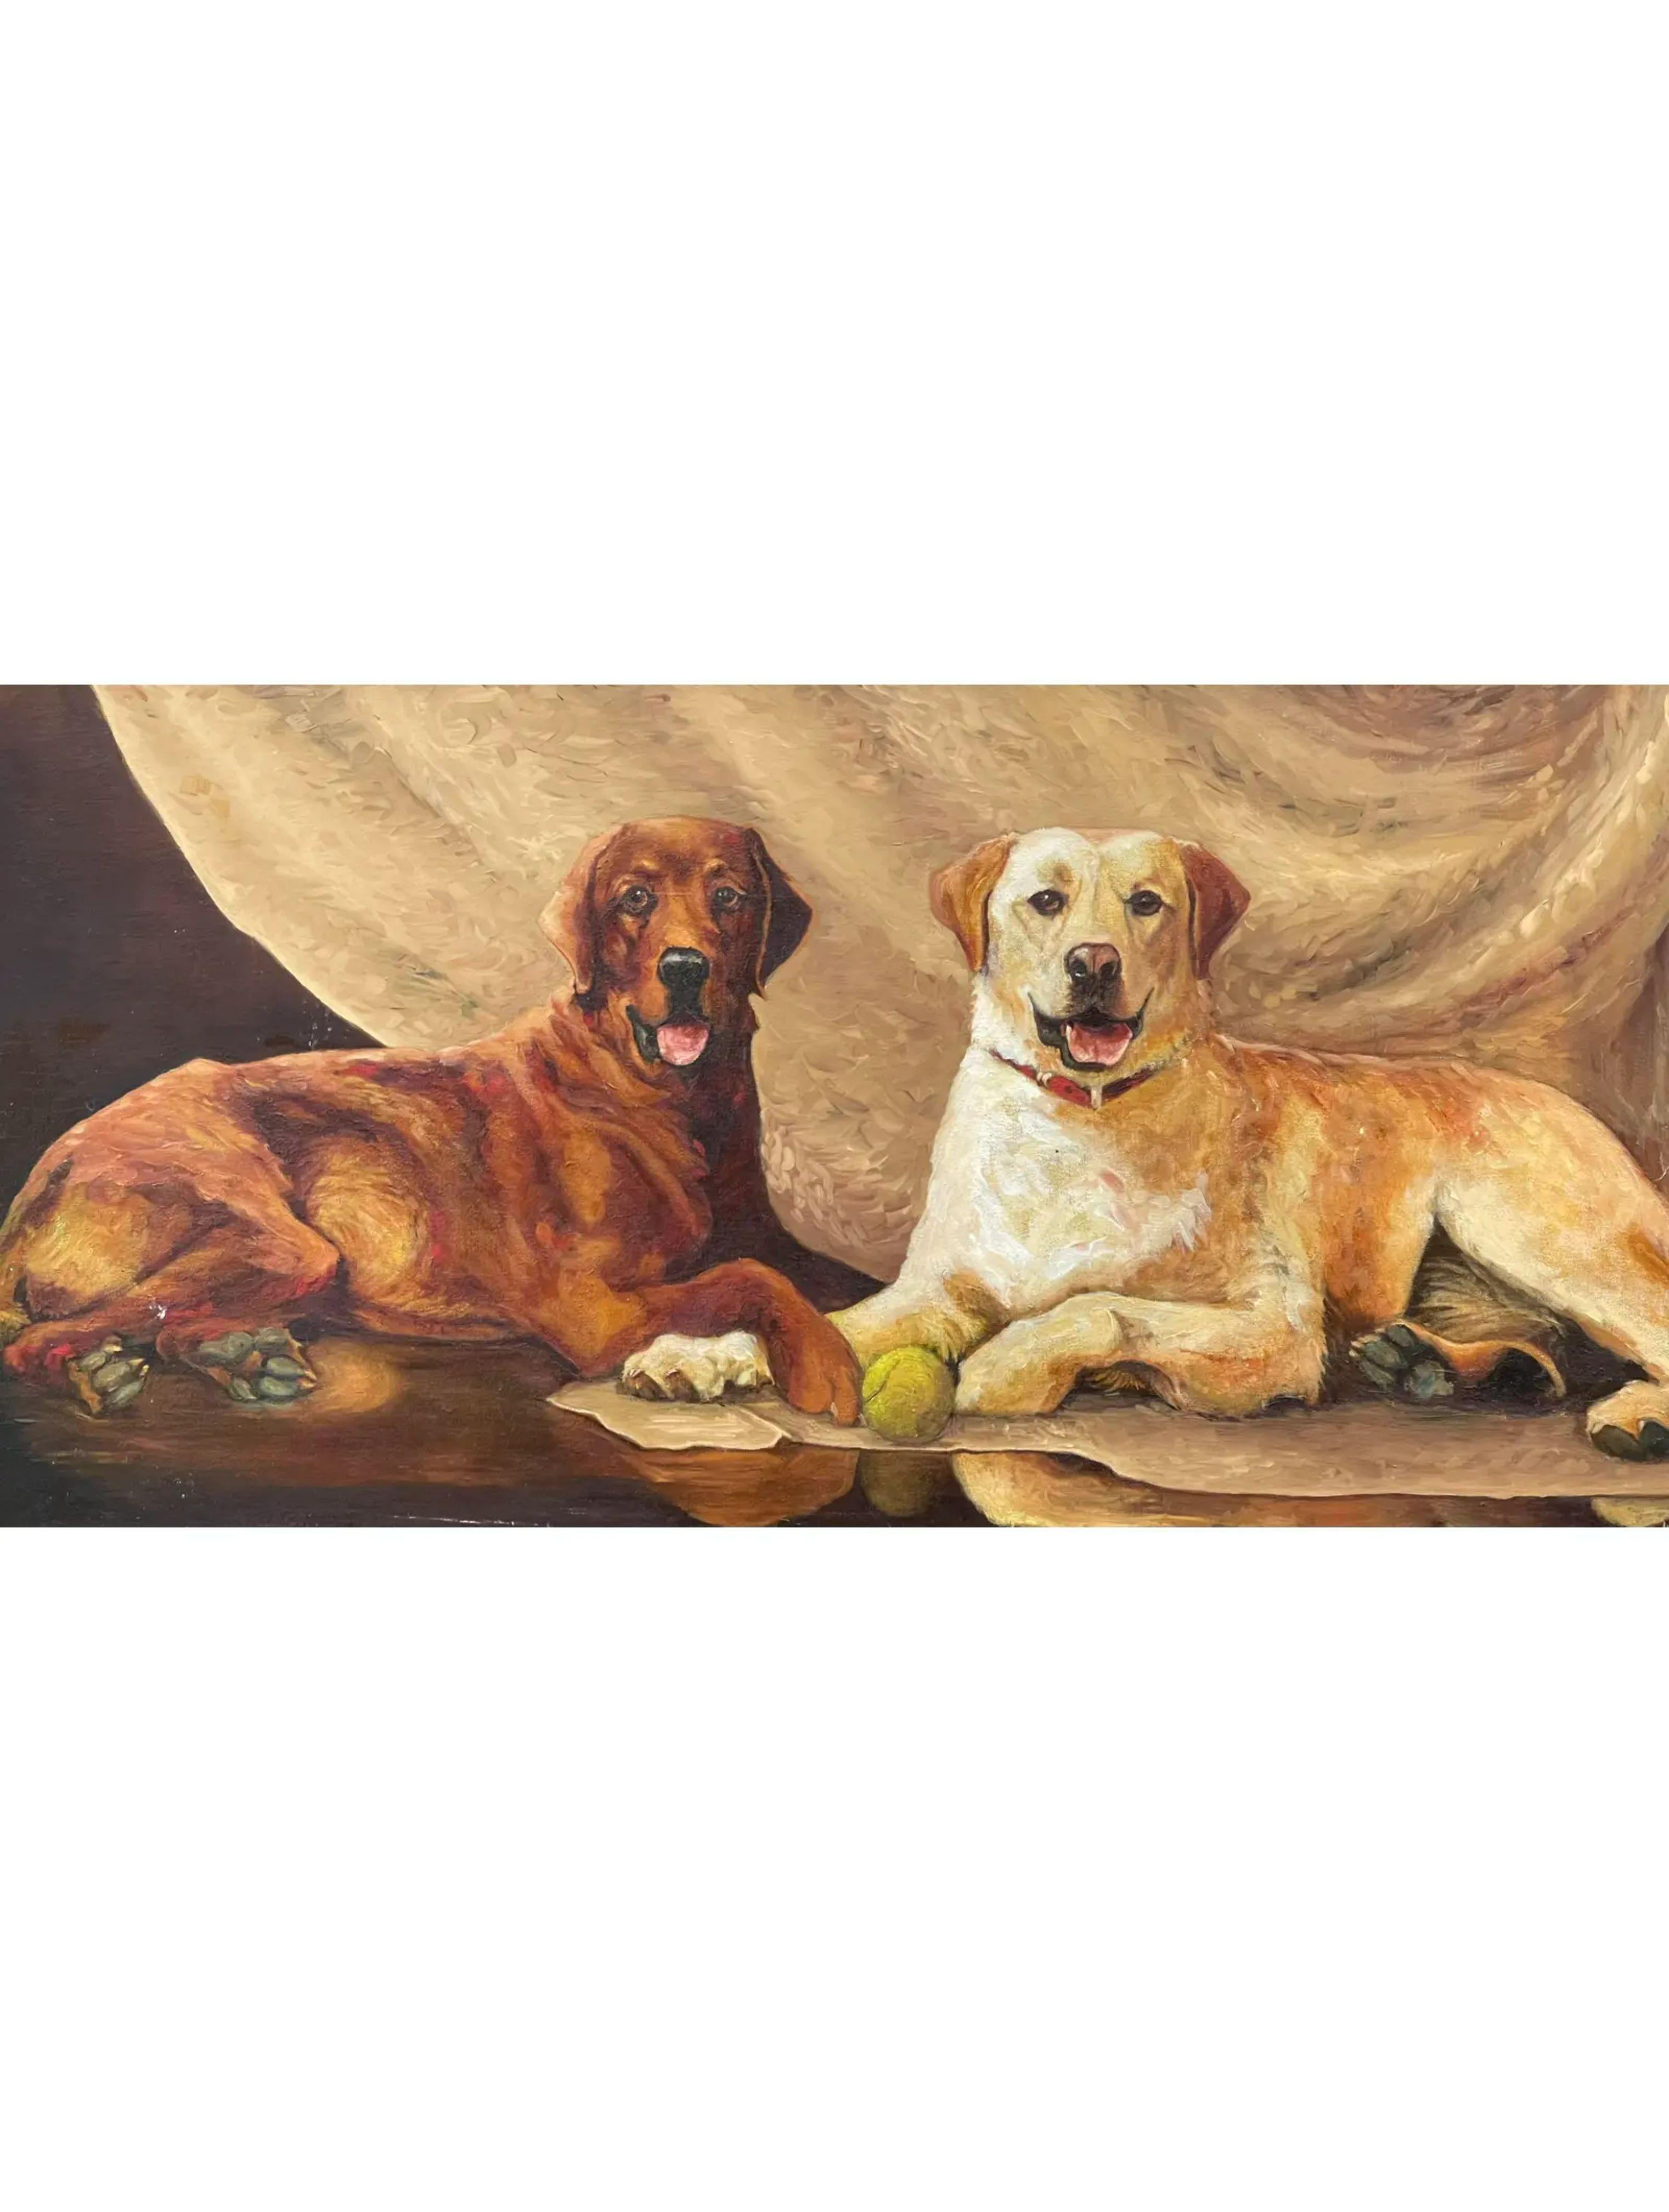 Vintage Original Oil Painting of 2 Dogs, 1980s 1